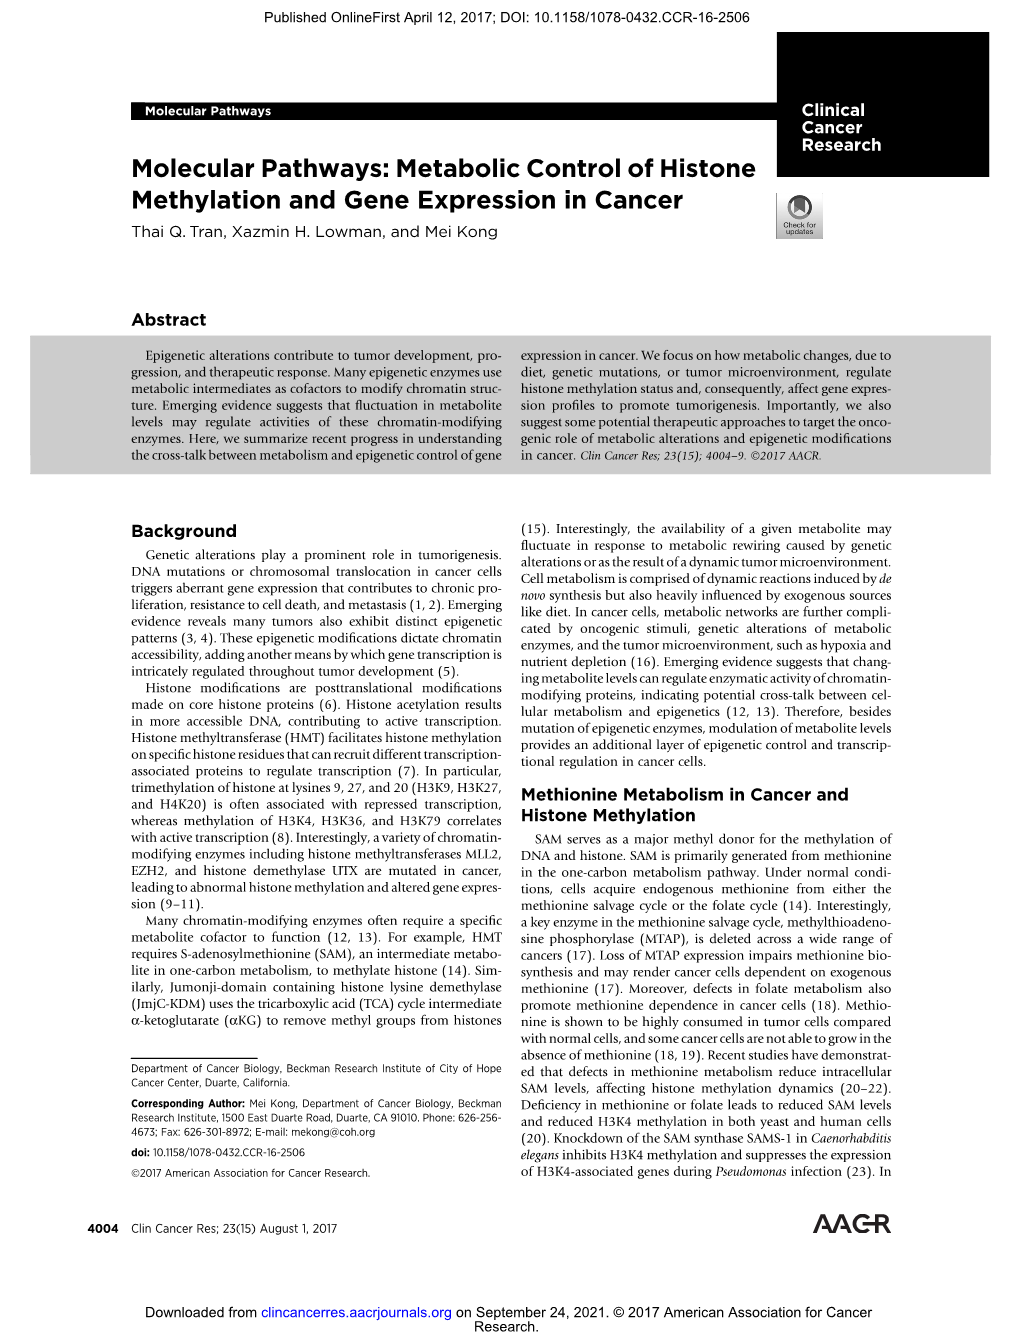 Metabolic Control of Histone Methylation and Gene Expression in Cancer Thai Q